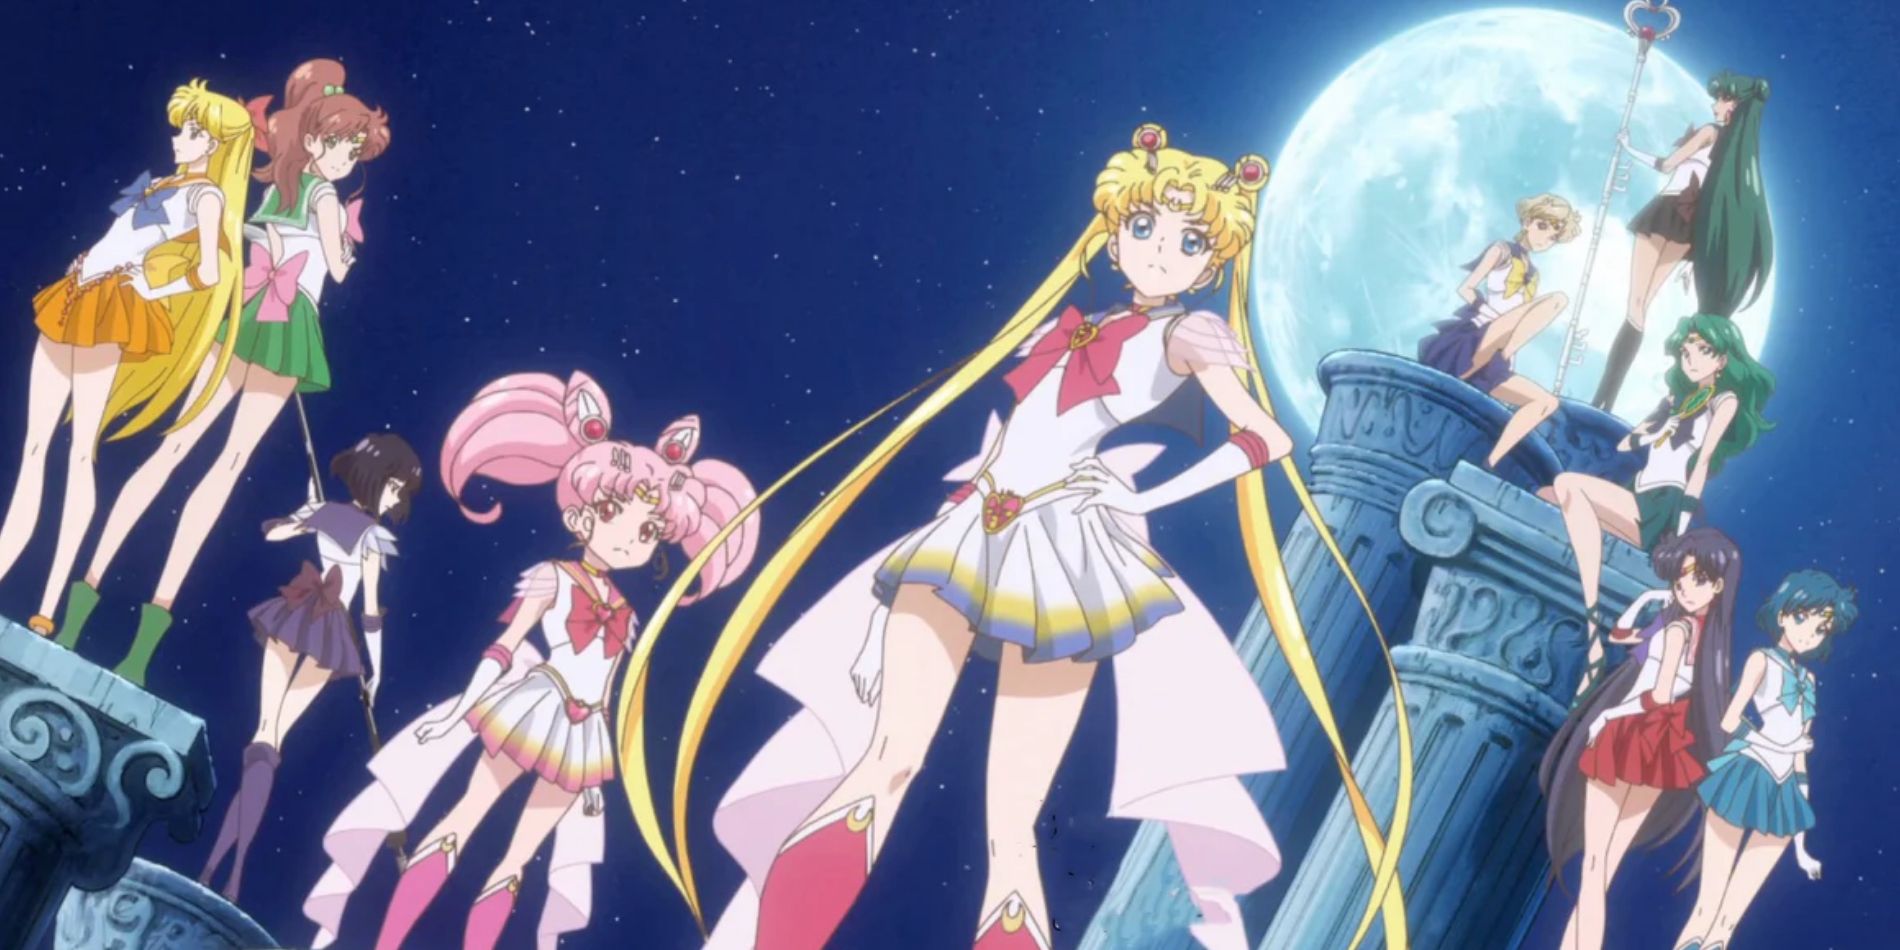 Sailor Moon stands at the front while her Sailor Senshi support her in what looks like the ruins of the Moon Kingdom in Sailor Moon Crystal